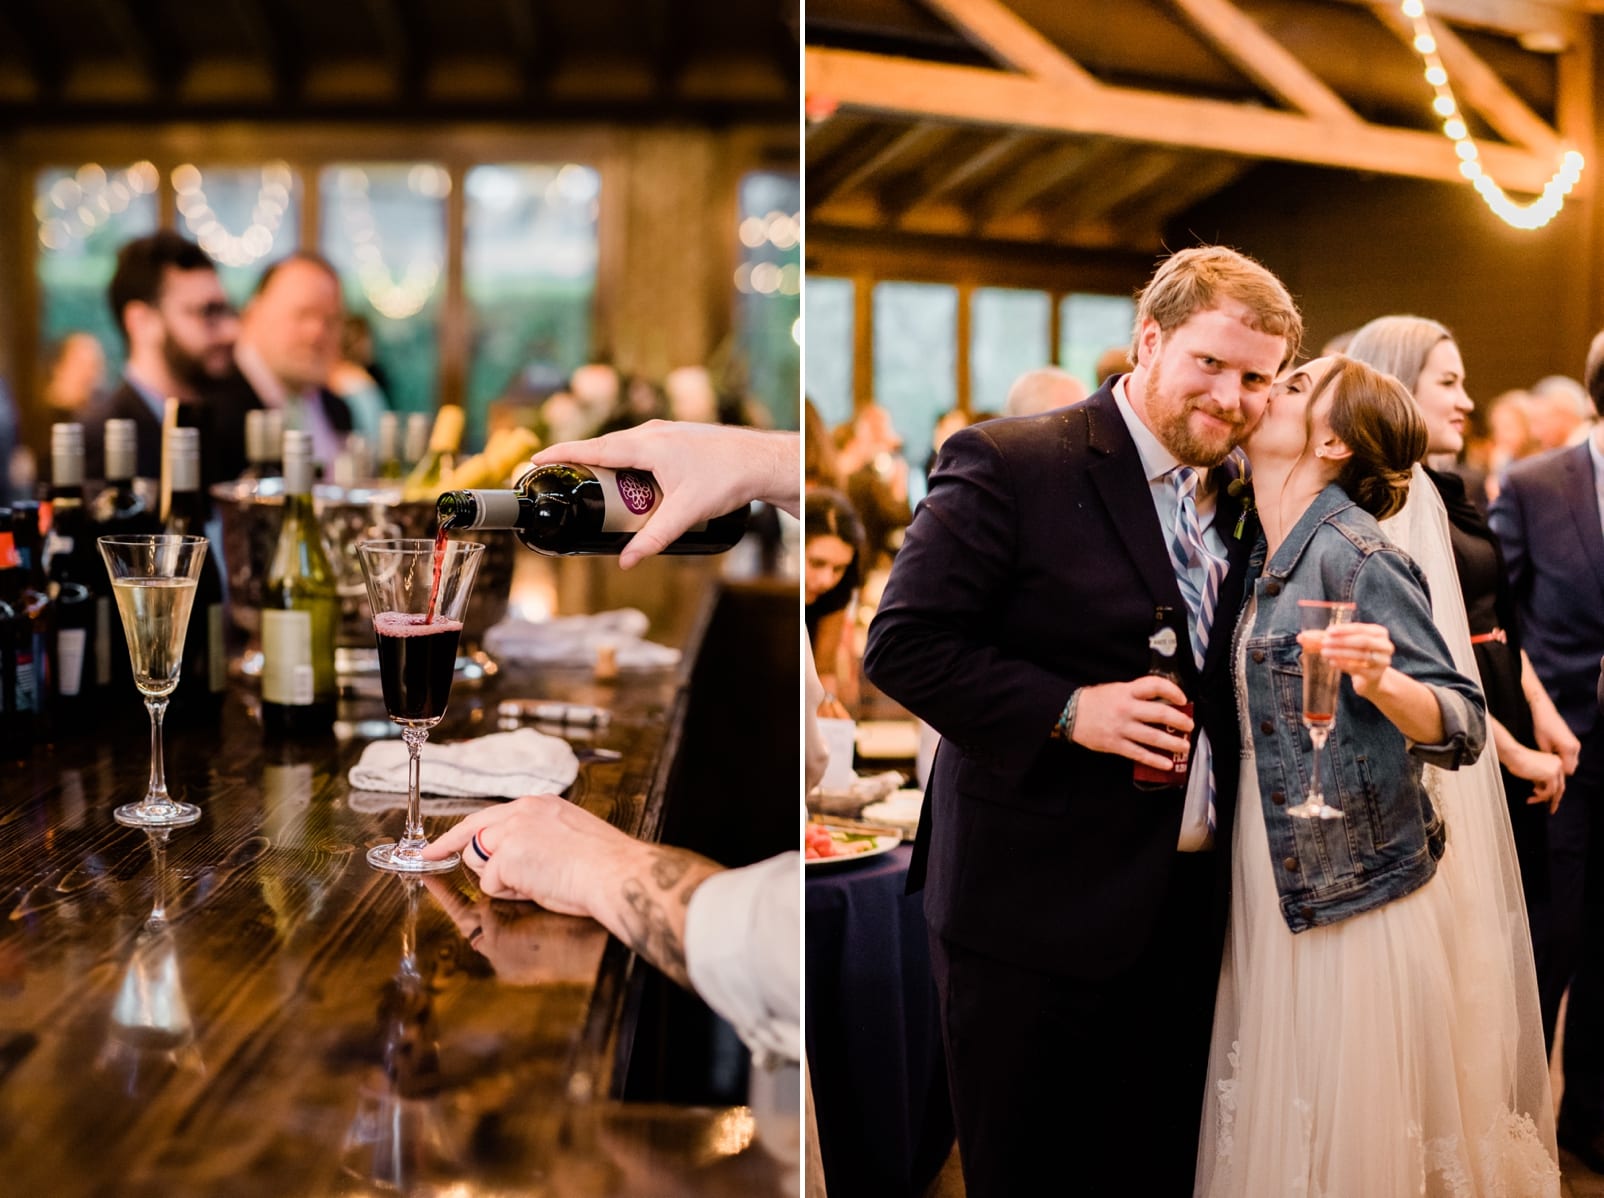 Sutherland estate indoor wedding reception bride kissing her groom on the check after toasting photo